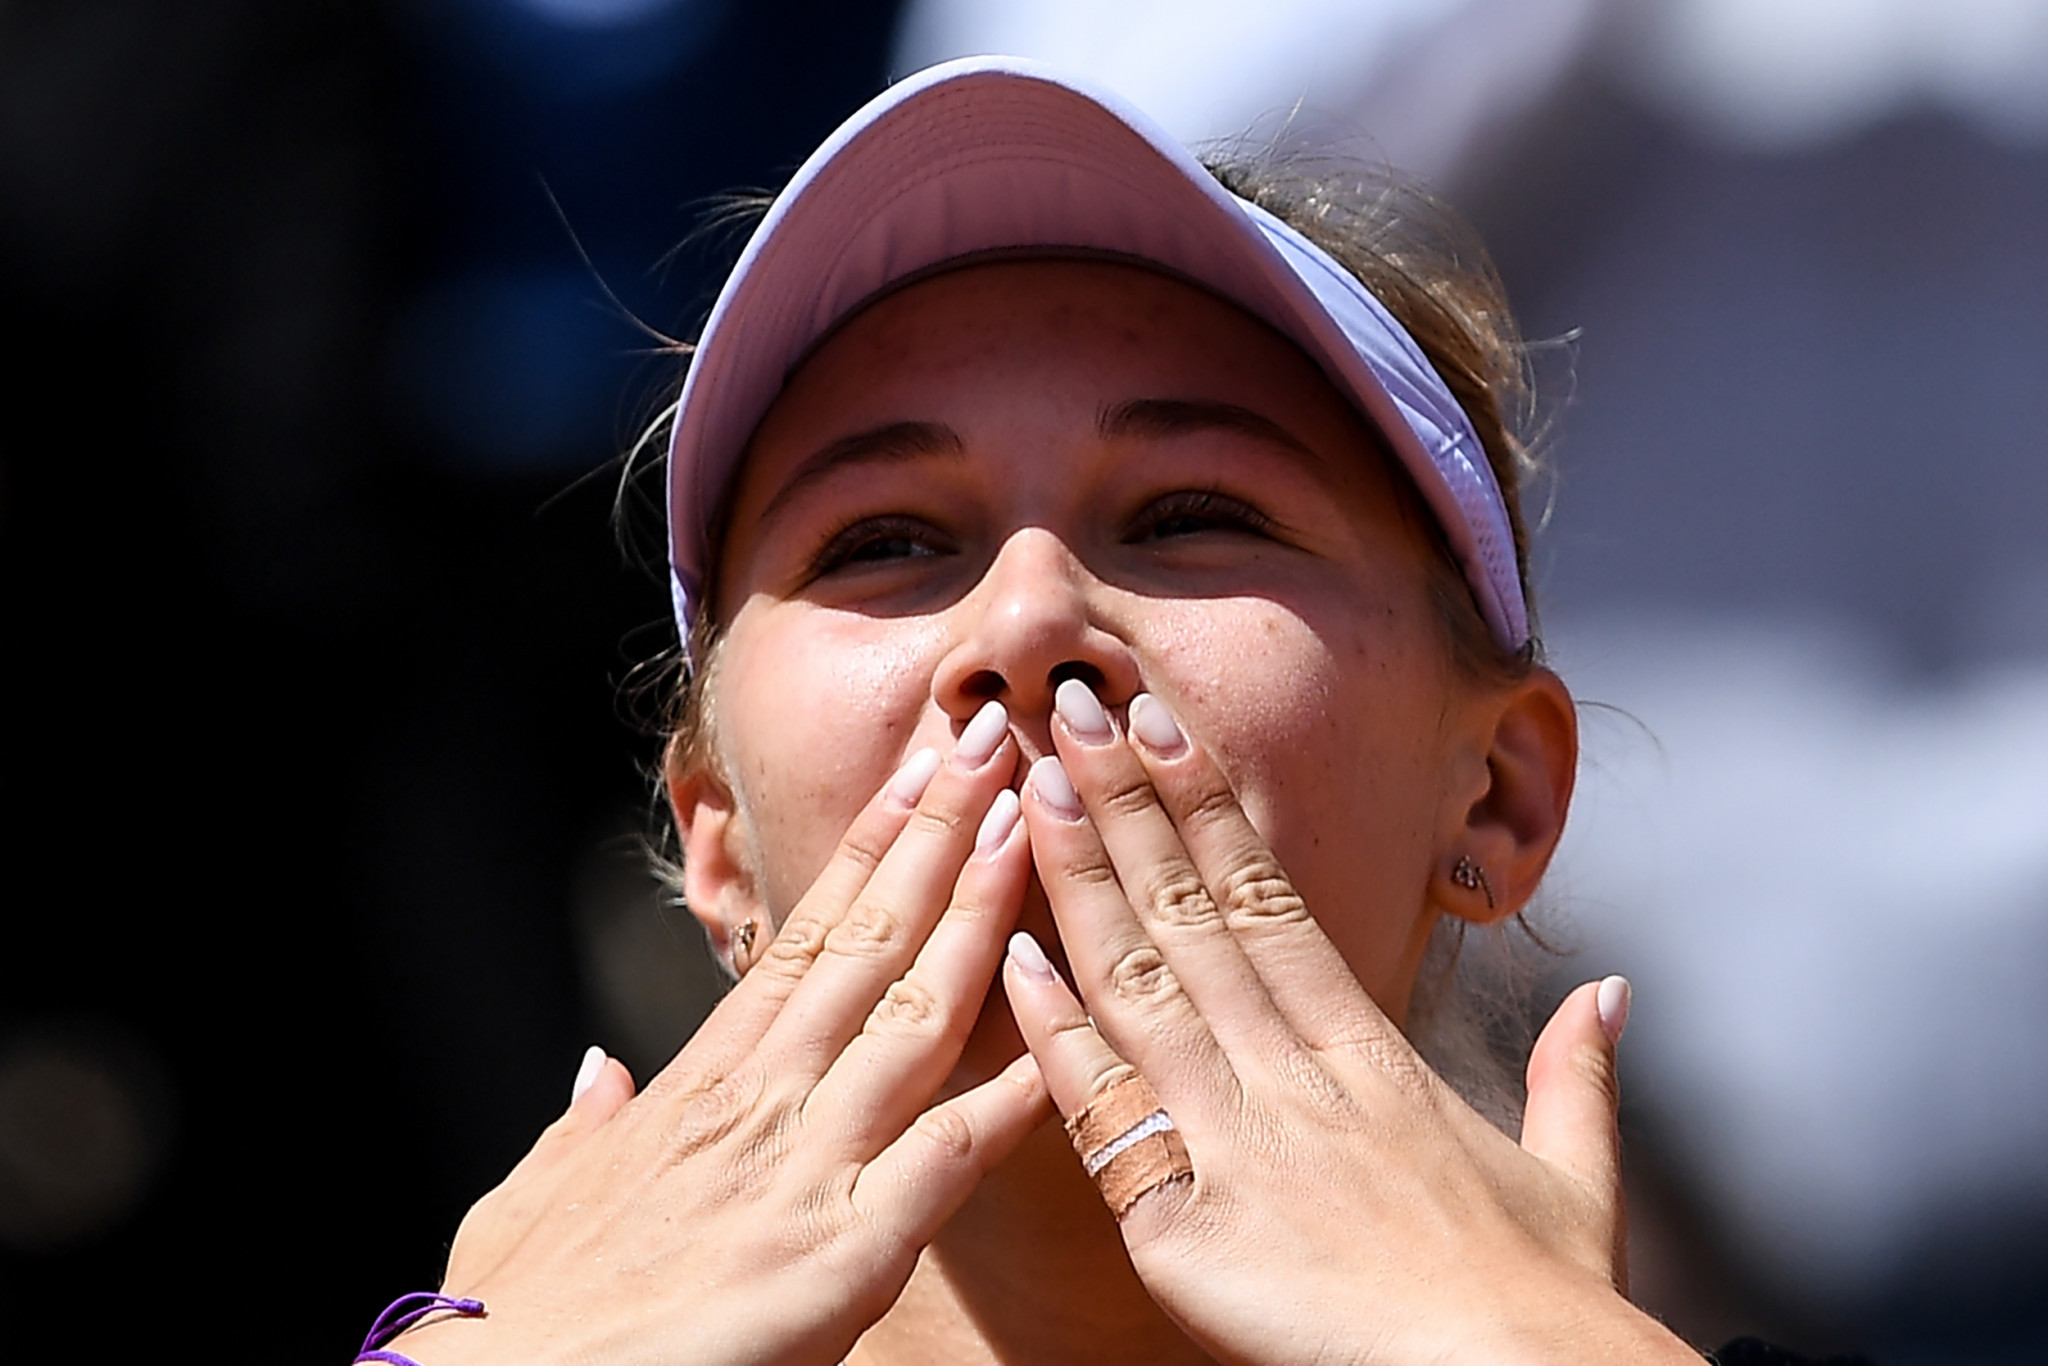 Anisimova's French Open fairytale continues at Roland Garros